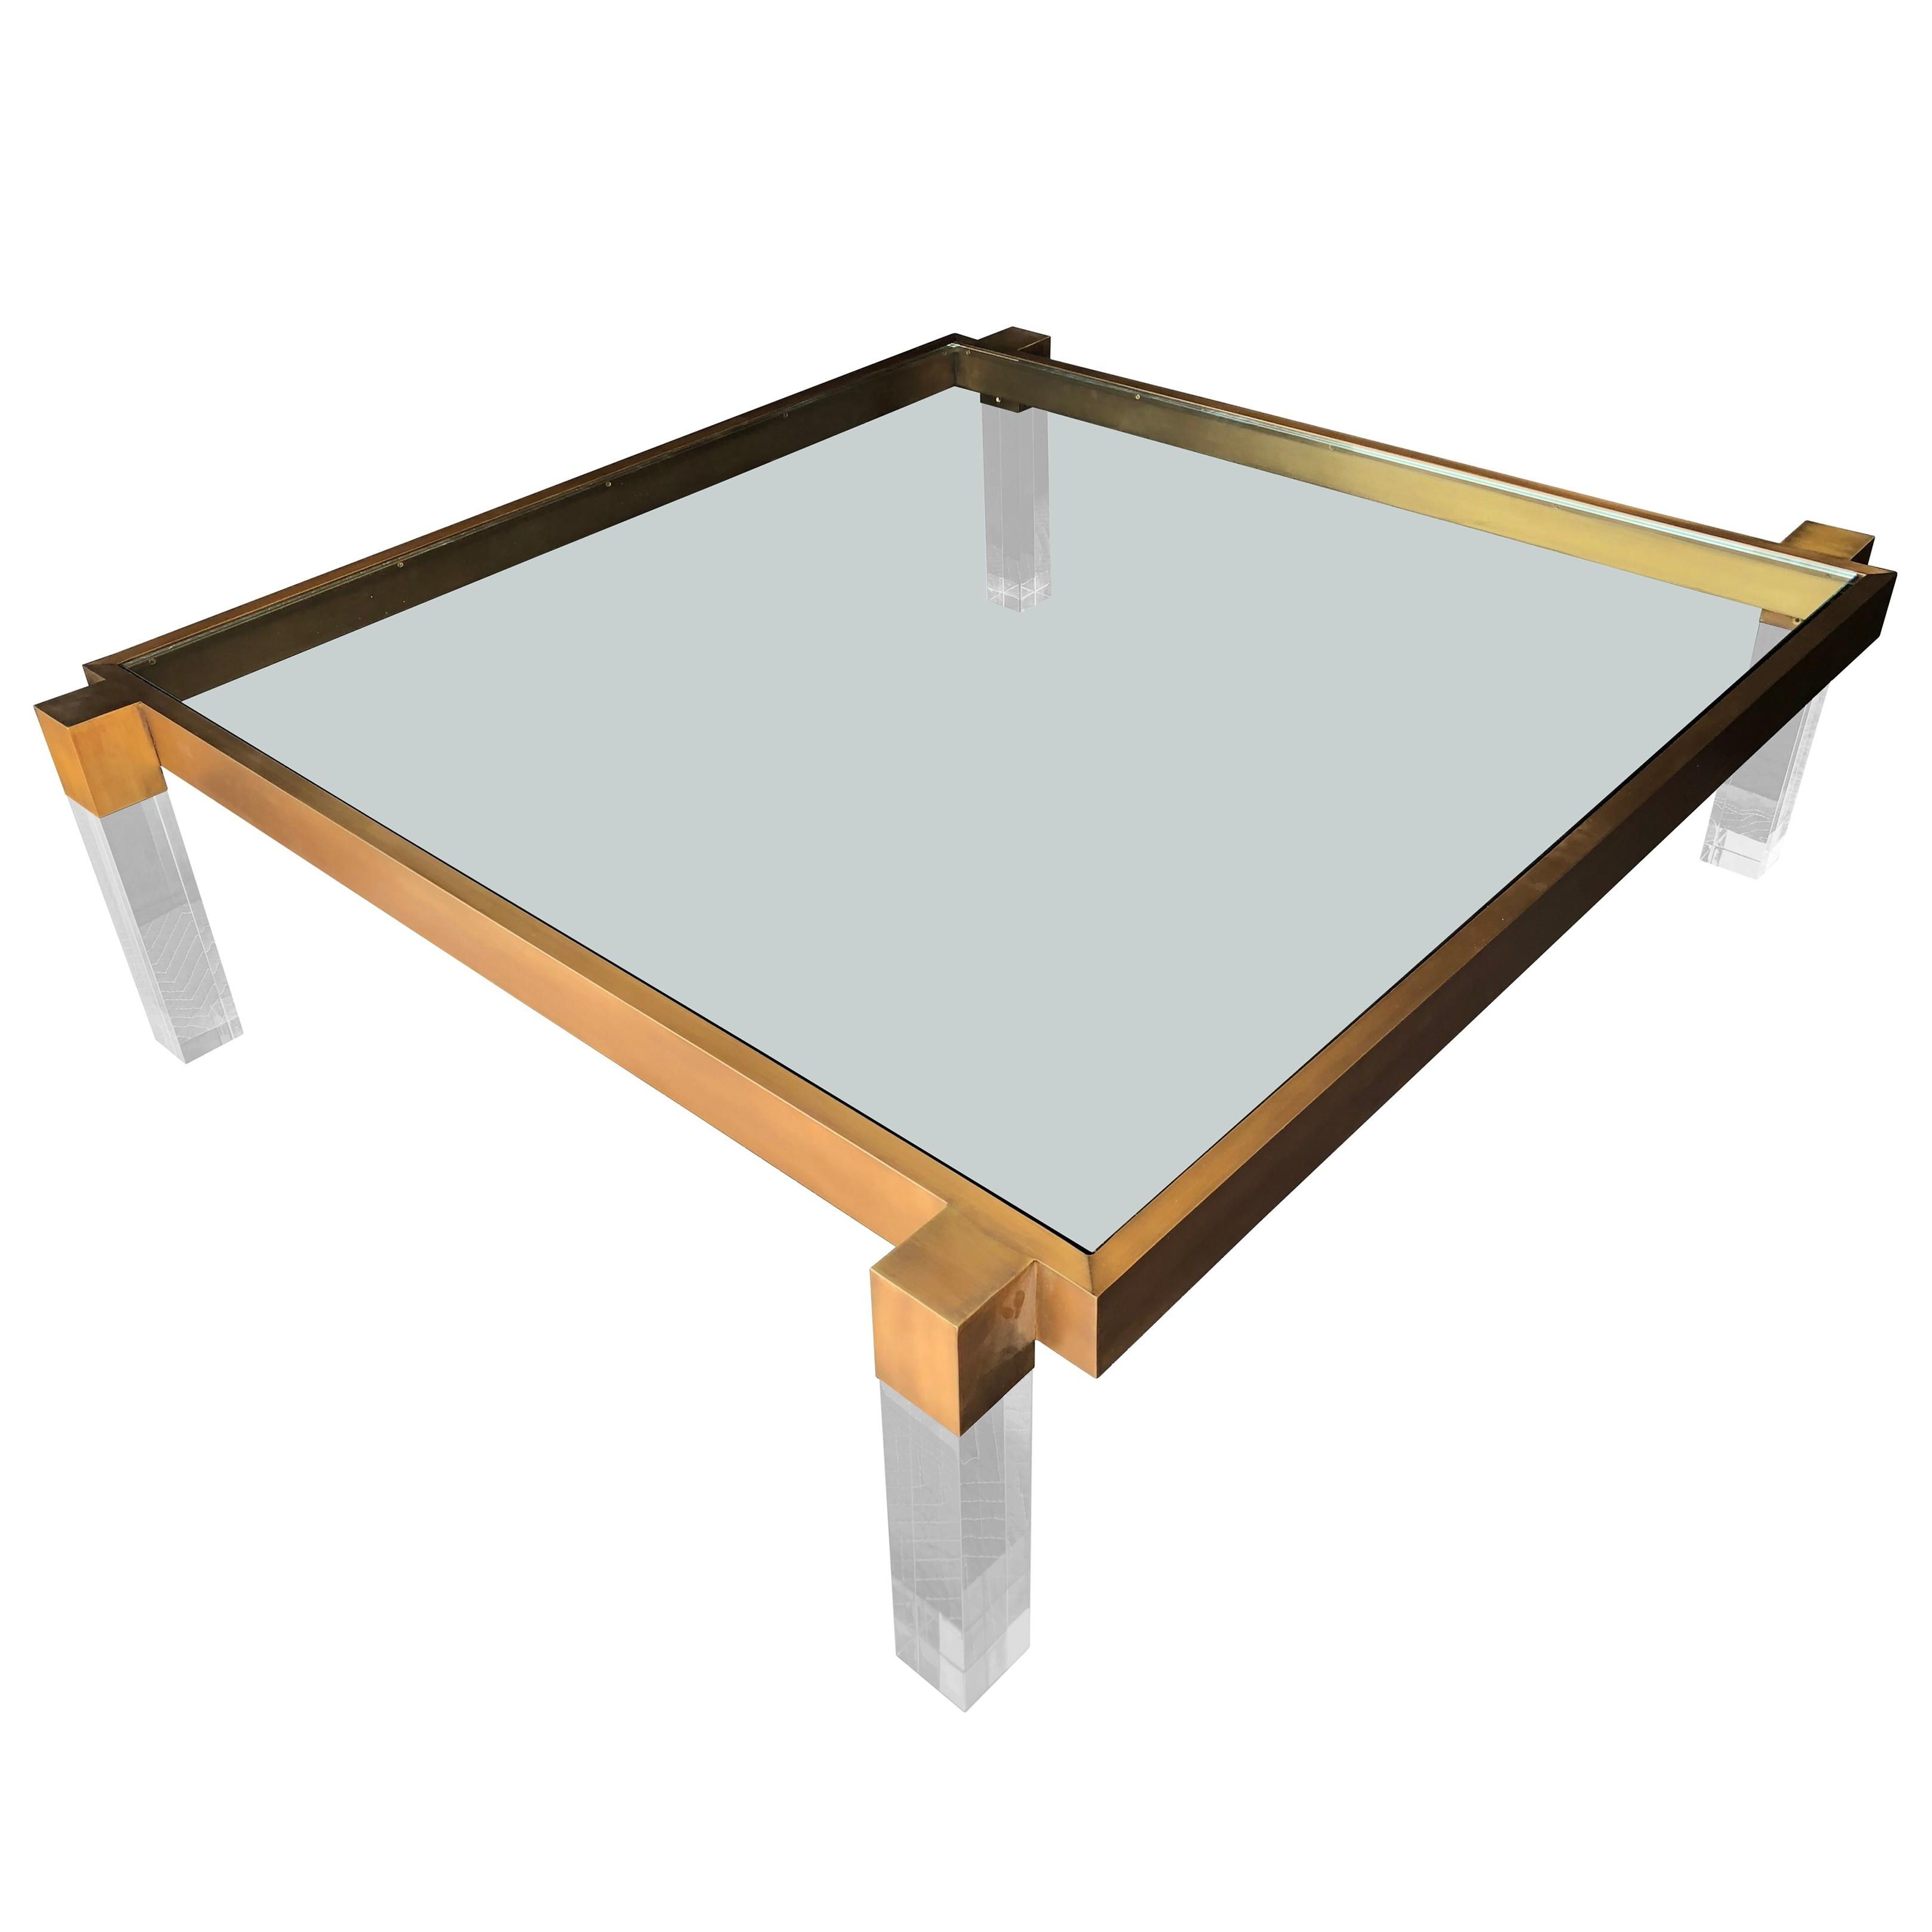 Widely Used Strata Chrome Glass Coffee Tables In Brass Coffee And Cocktail Tables – 3,110 For Sale At 1stdibs (Gallery 20 of 20)